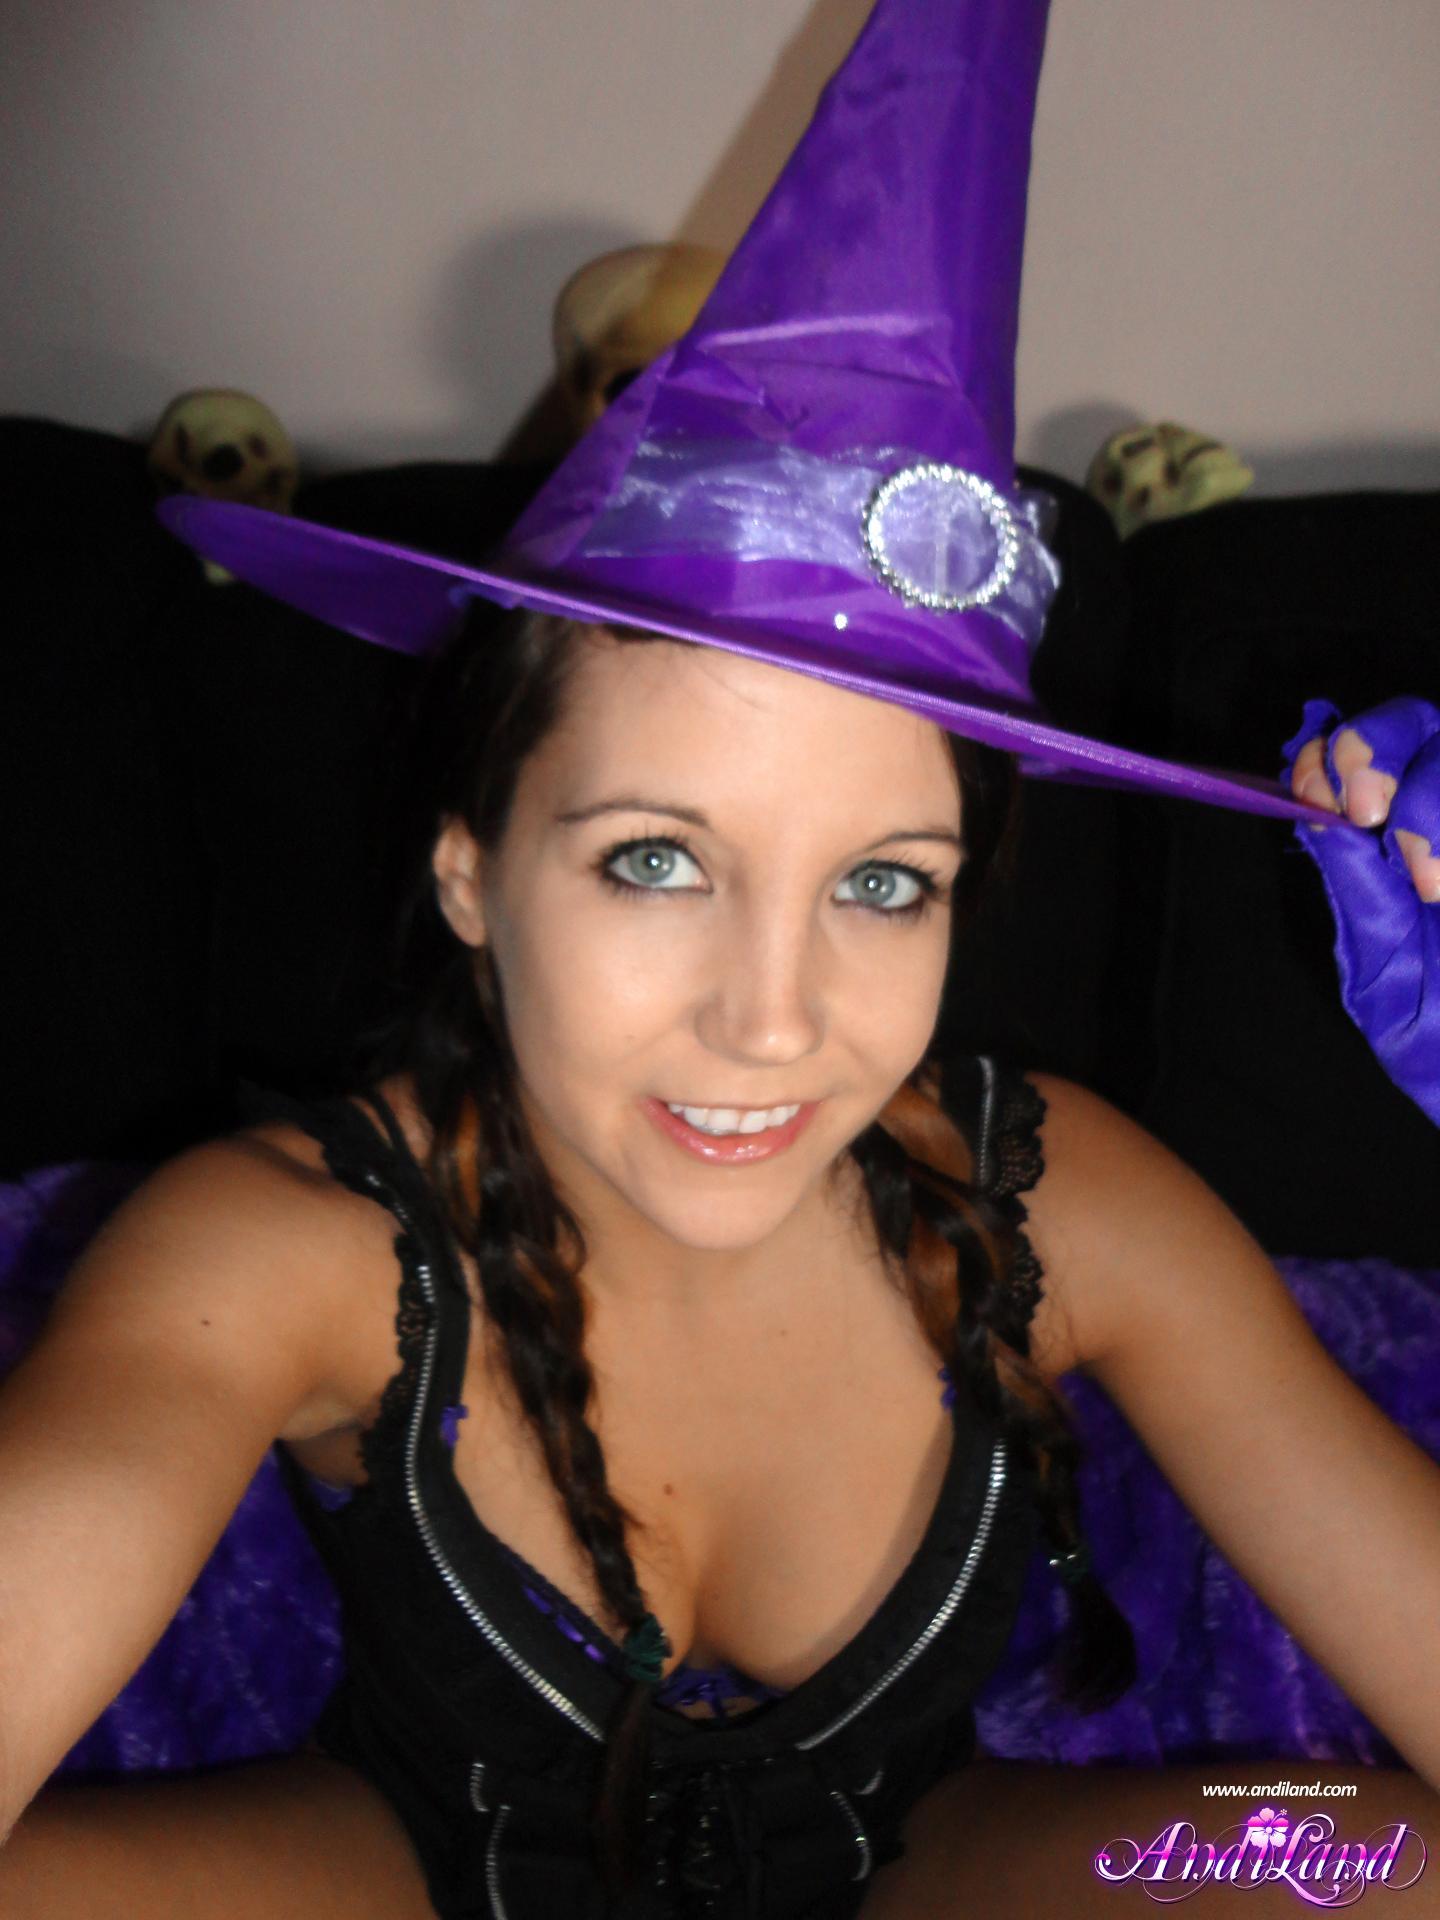 Pictures of Andi Land dressed as a super sexy witch for Halloween #53142112